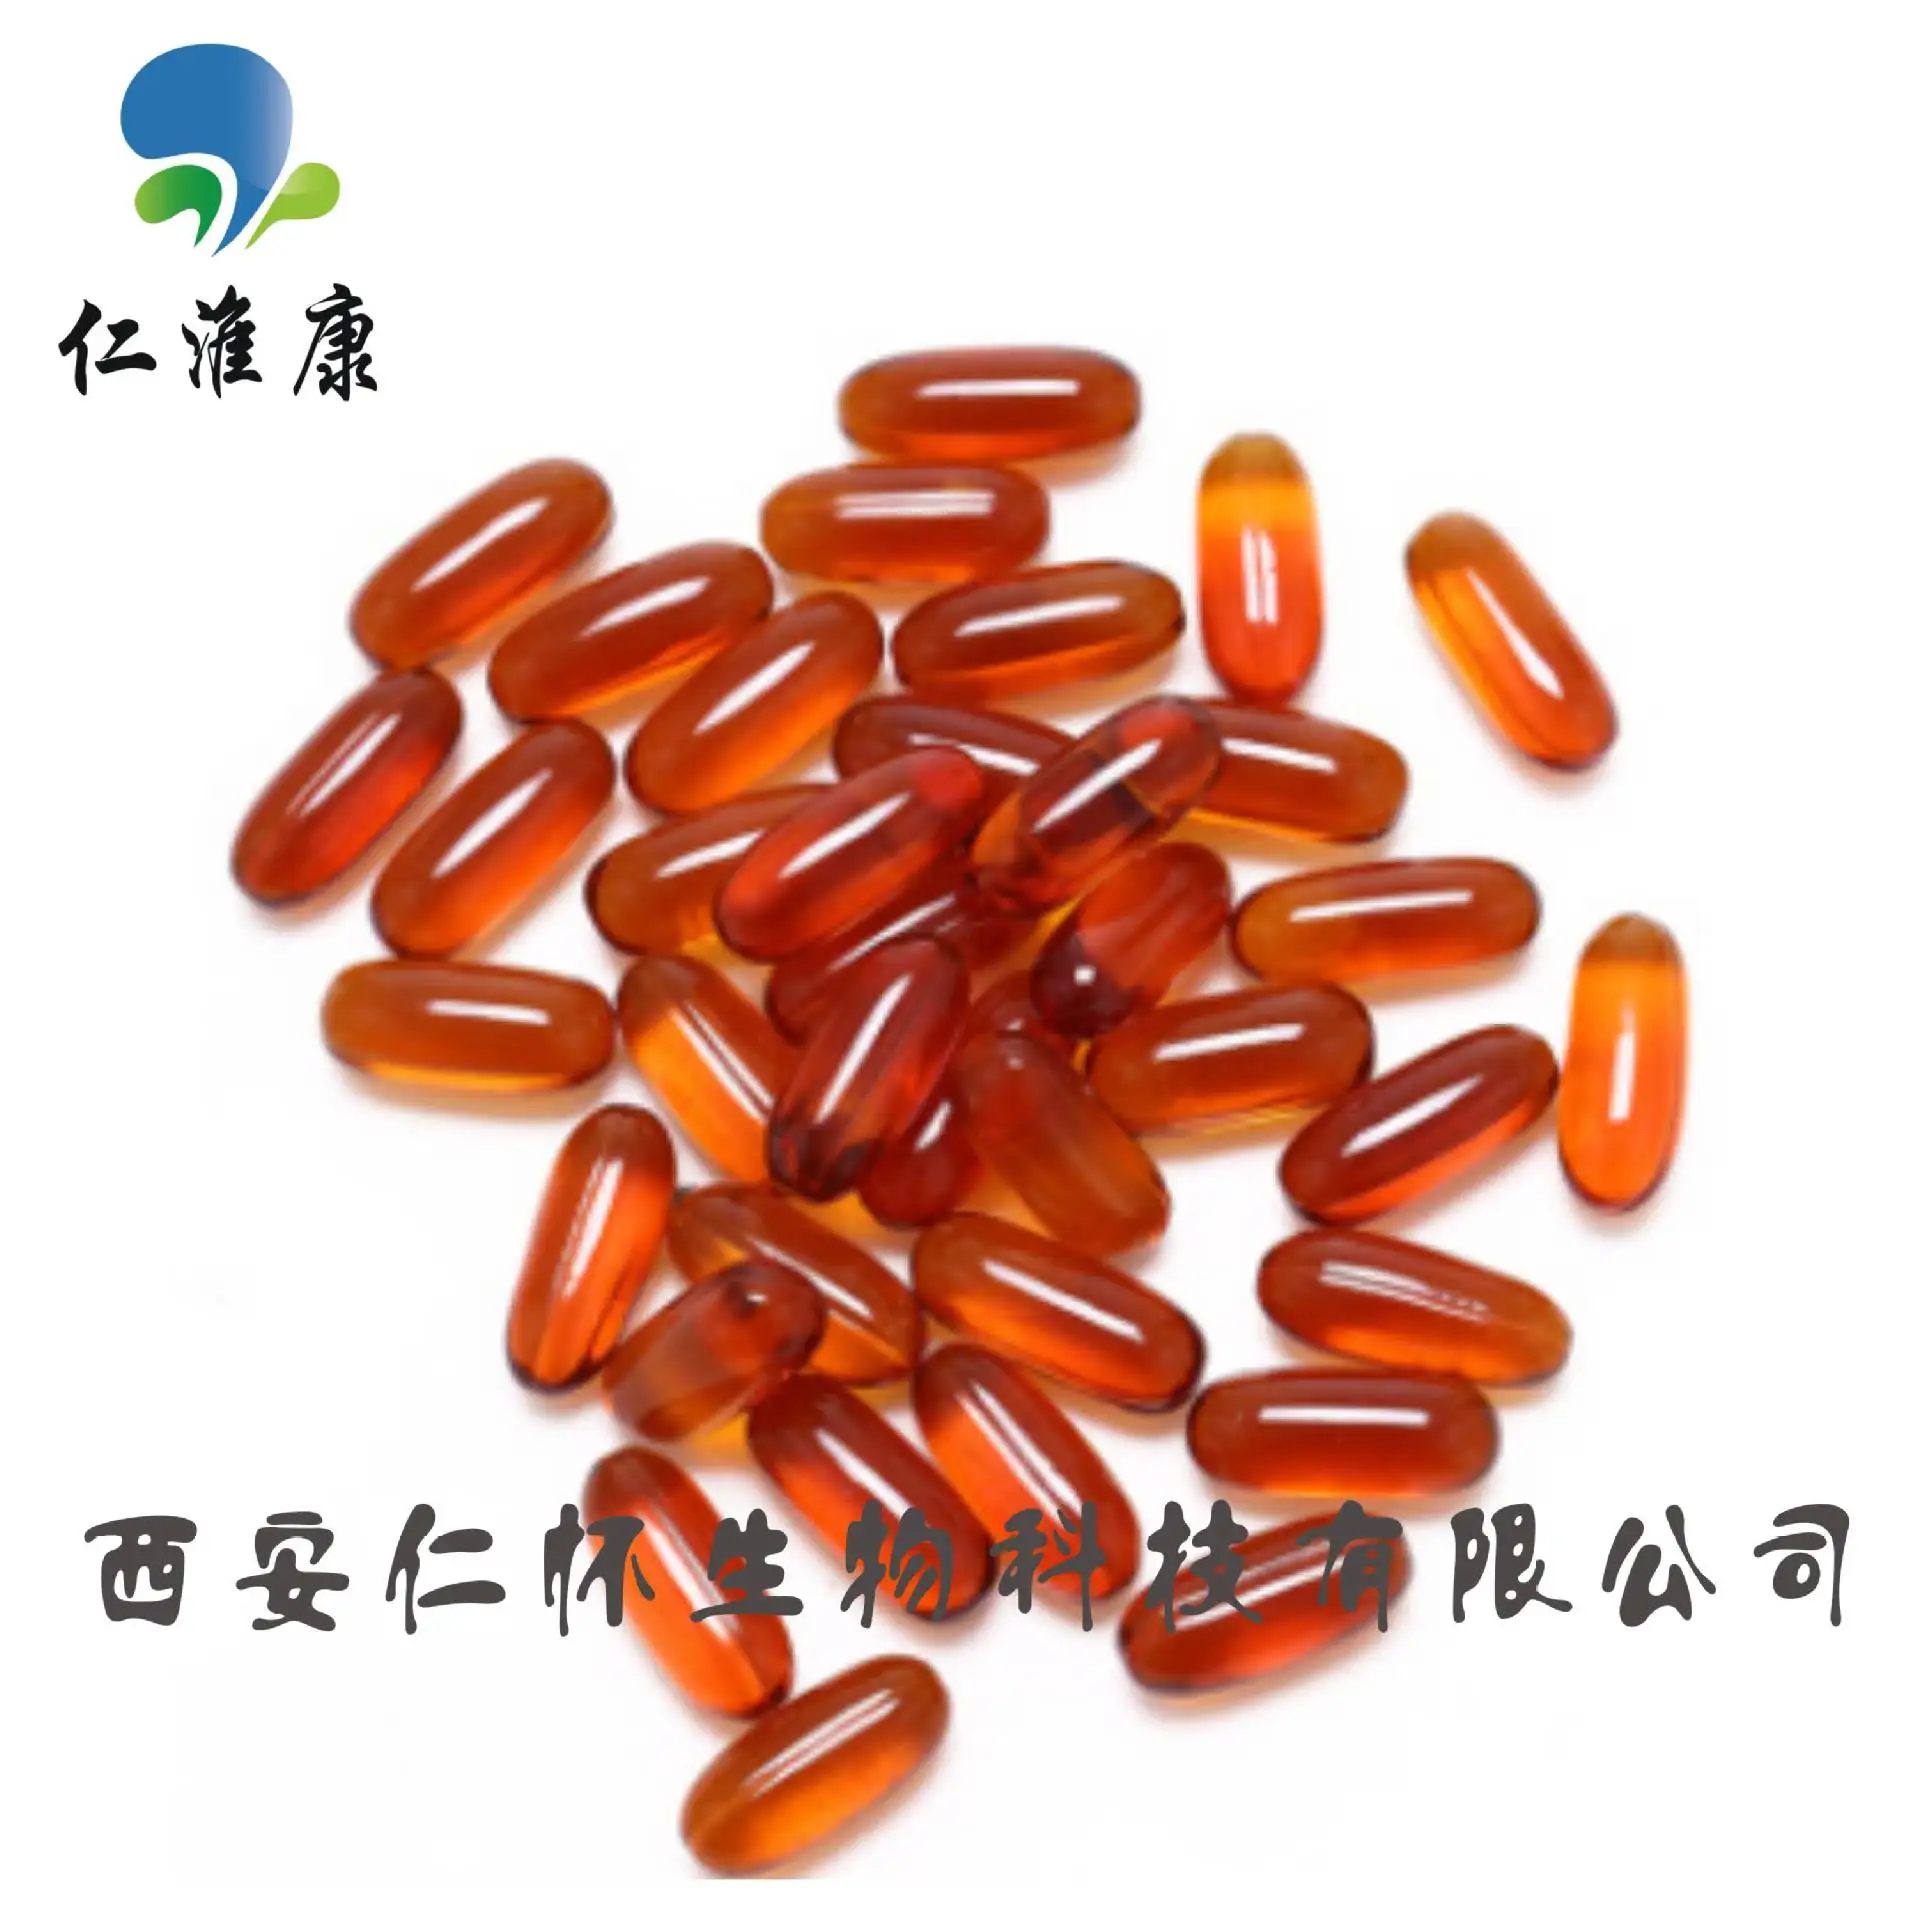 Renhuaikang Soybean Lecithin Capsule Lecithin Soft Capsule Health Care Products Oral 100 Tablets Spot Supply 3 Bottles 24 126999